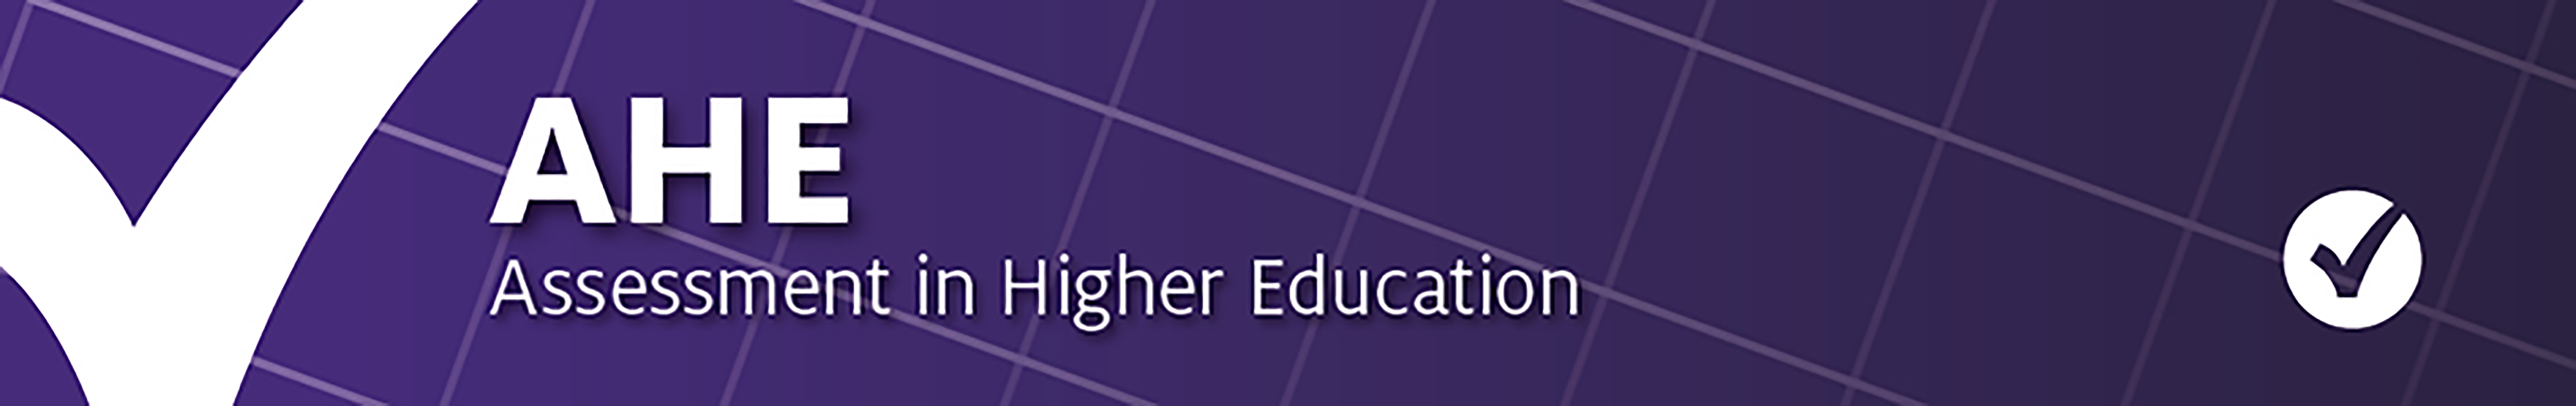 Assessment in Higher Education (AHE) Conference 2021 (Manchester